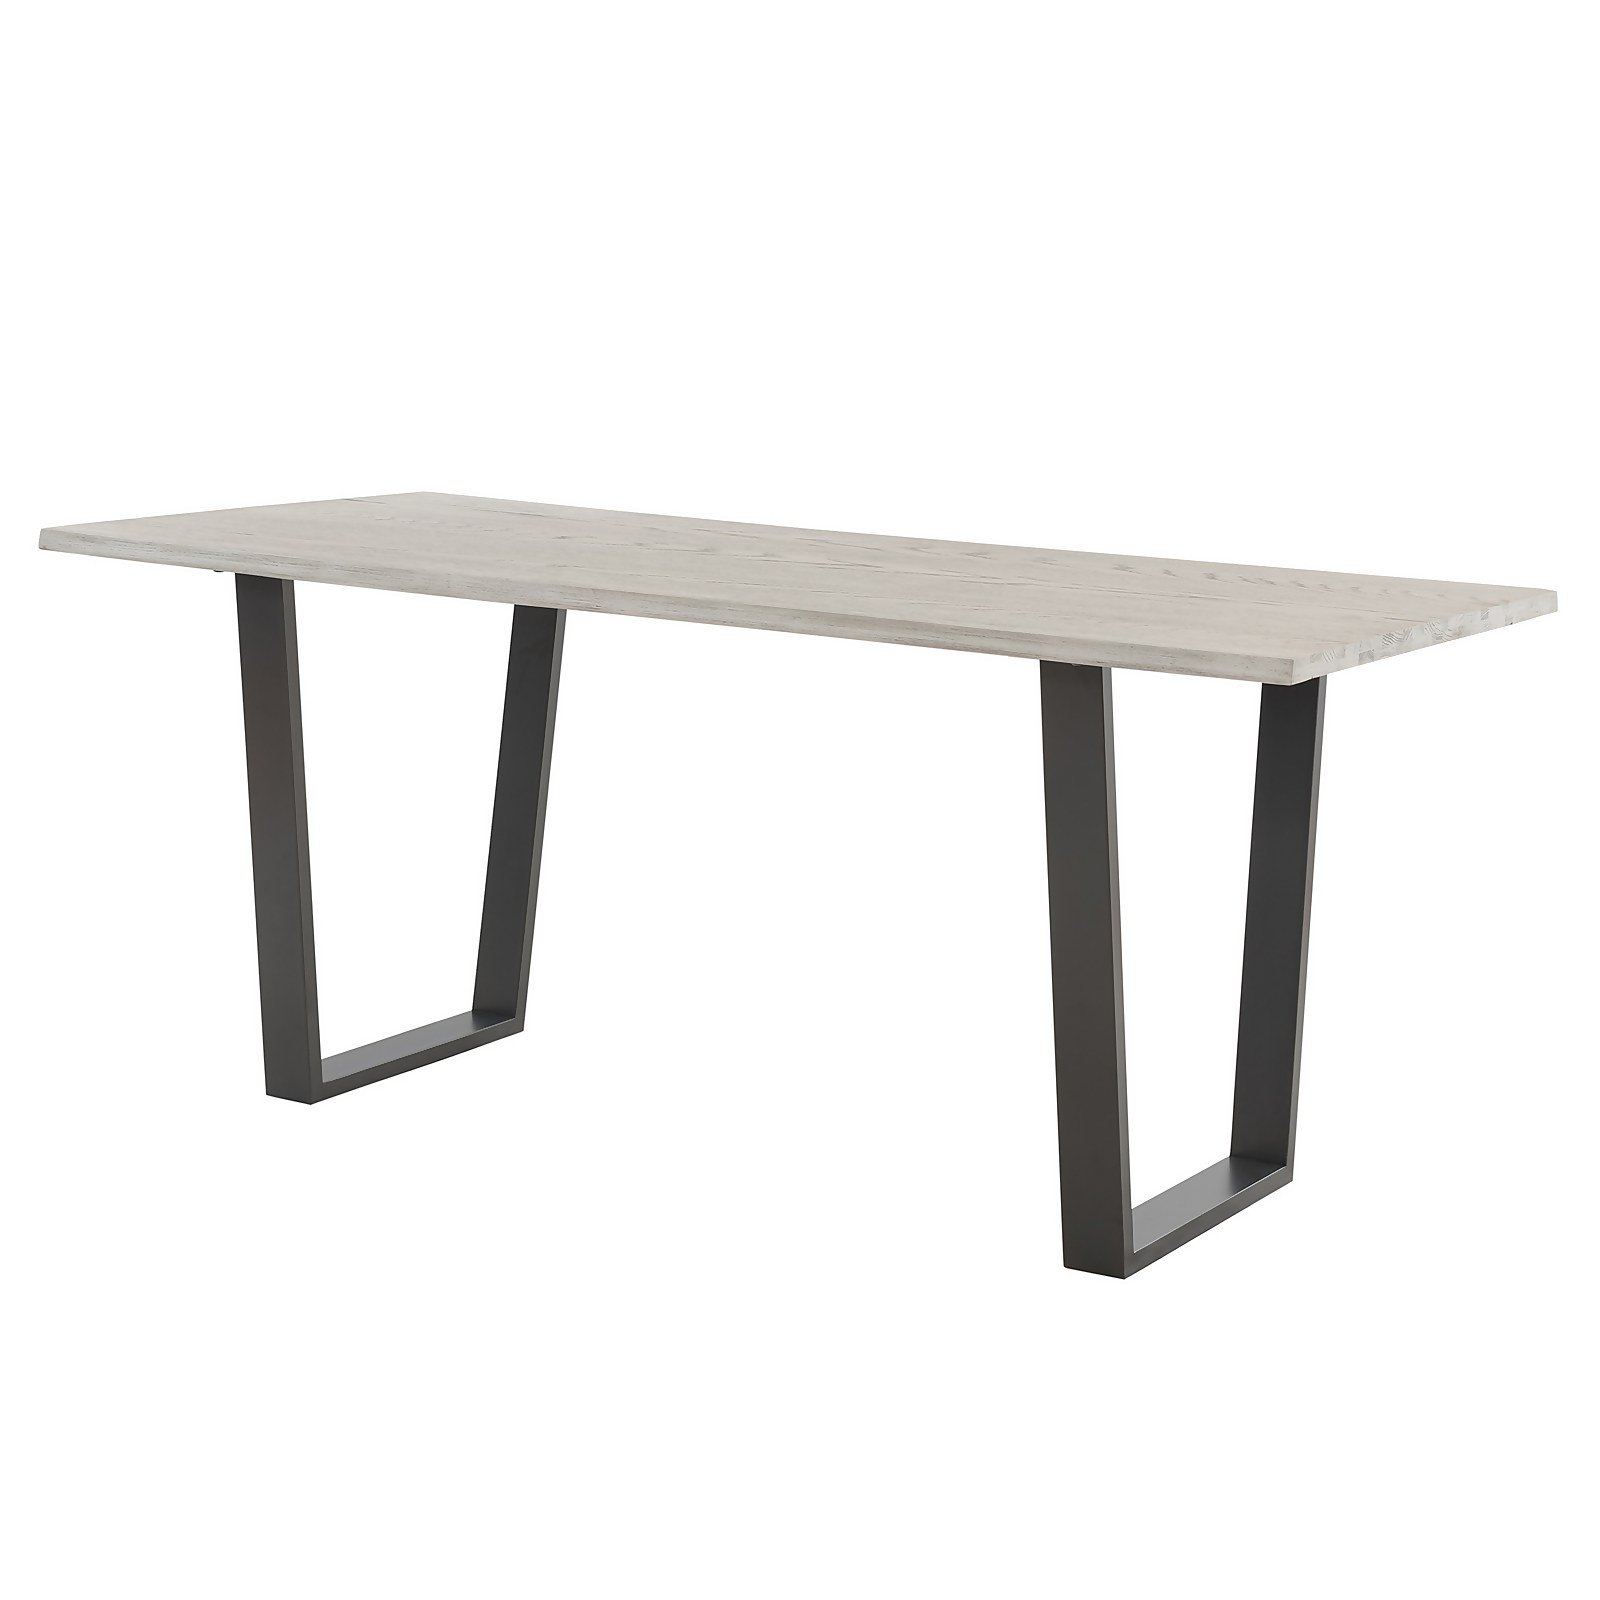 Photo of Dalston Grey Ash Dining Table